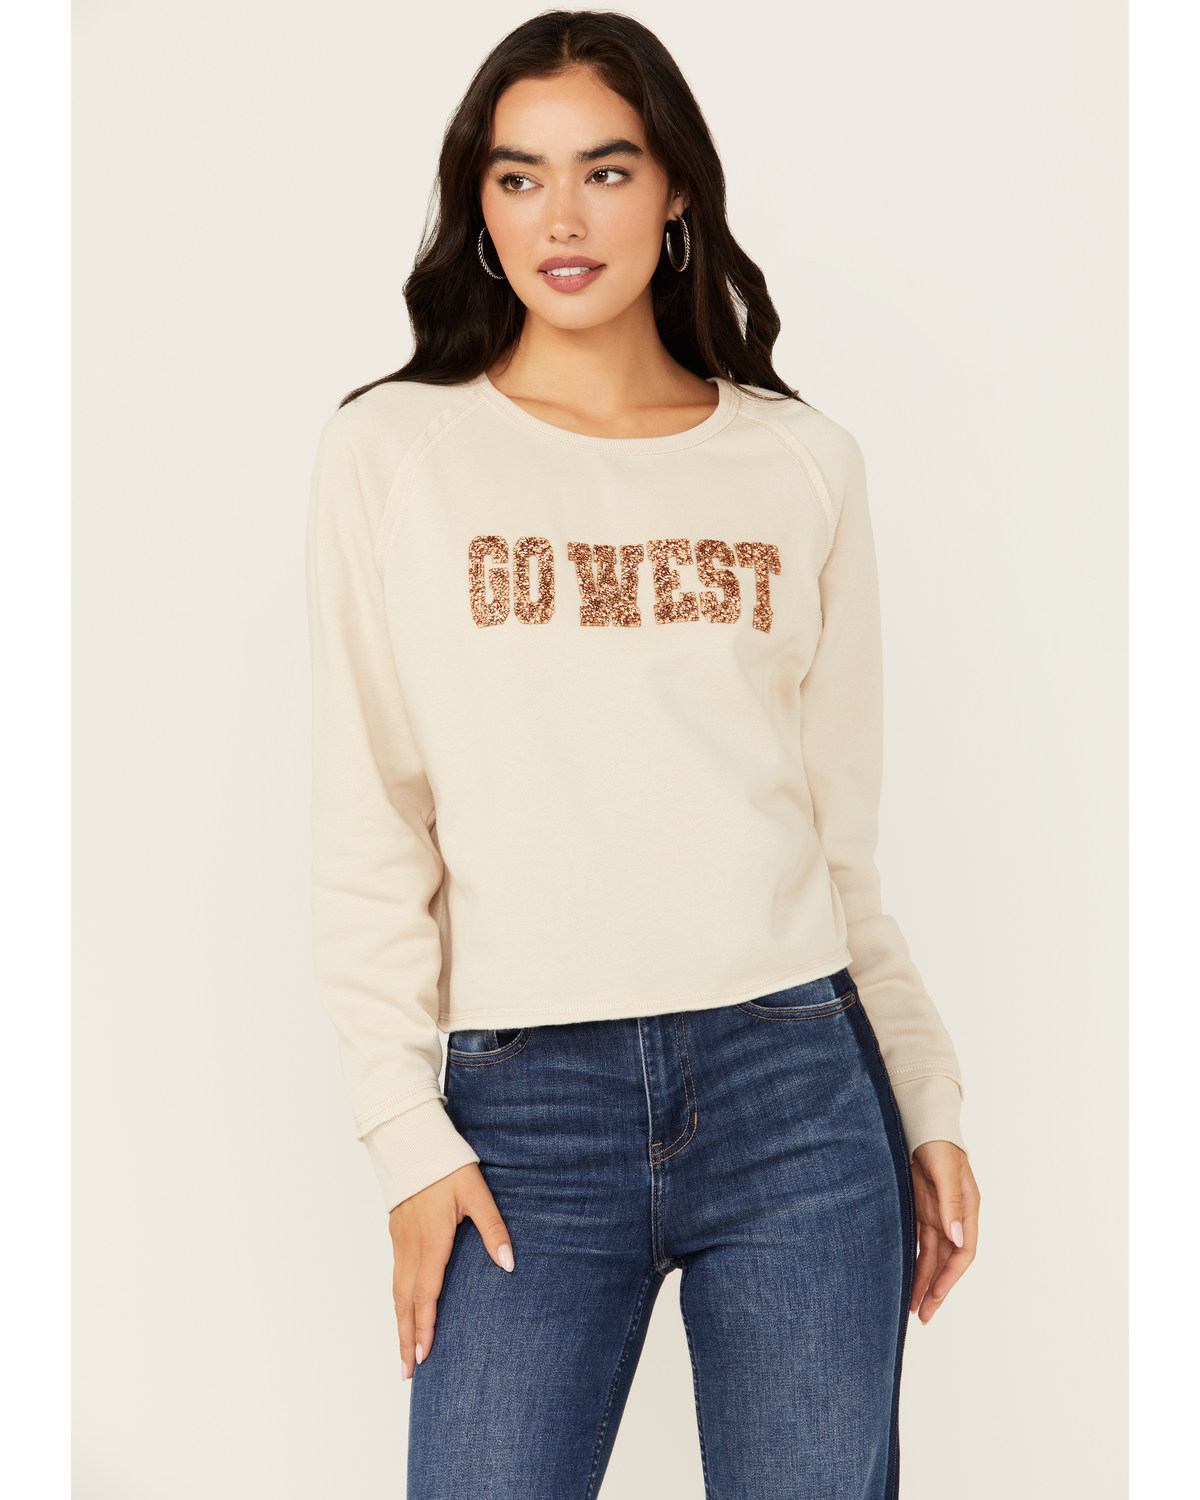 Blended Women's Go West Sequins Graphic Long Sleeve Tee